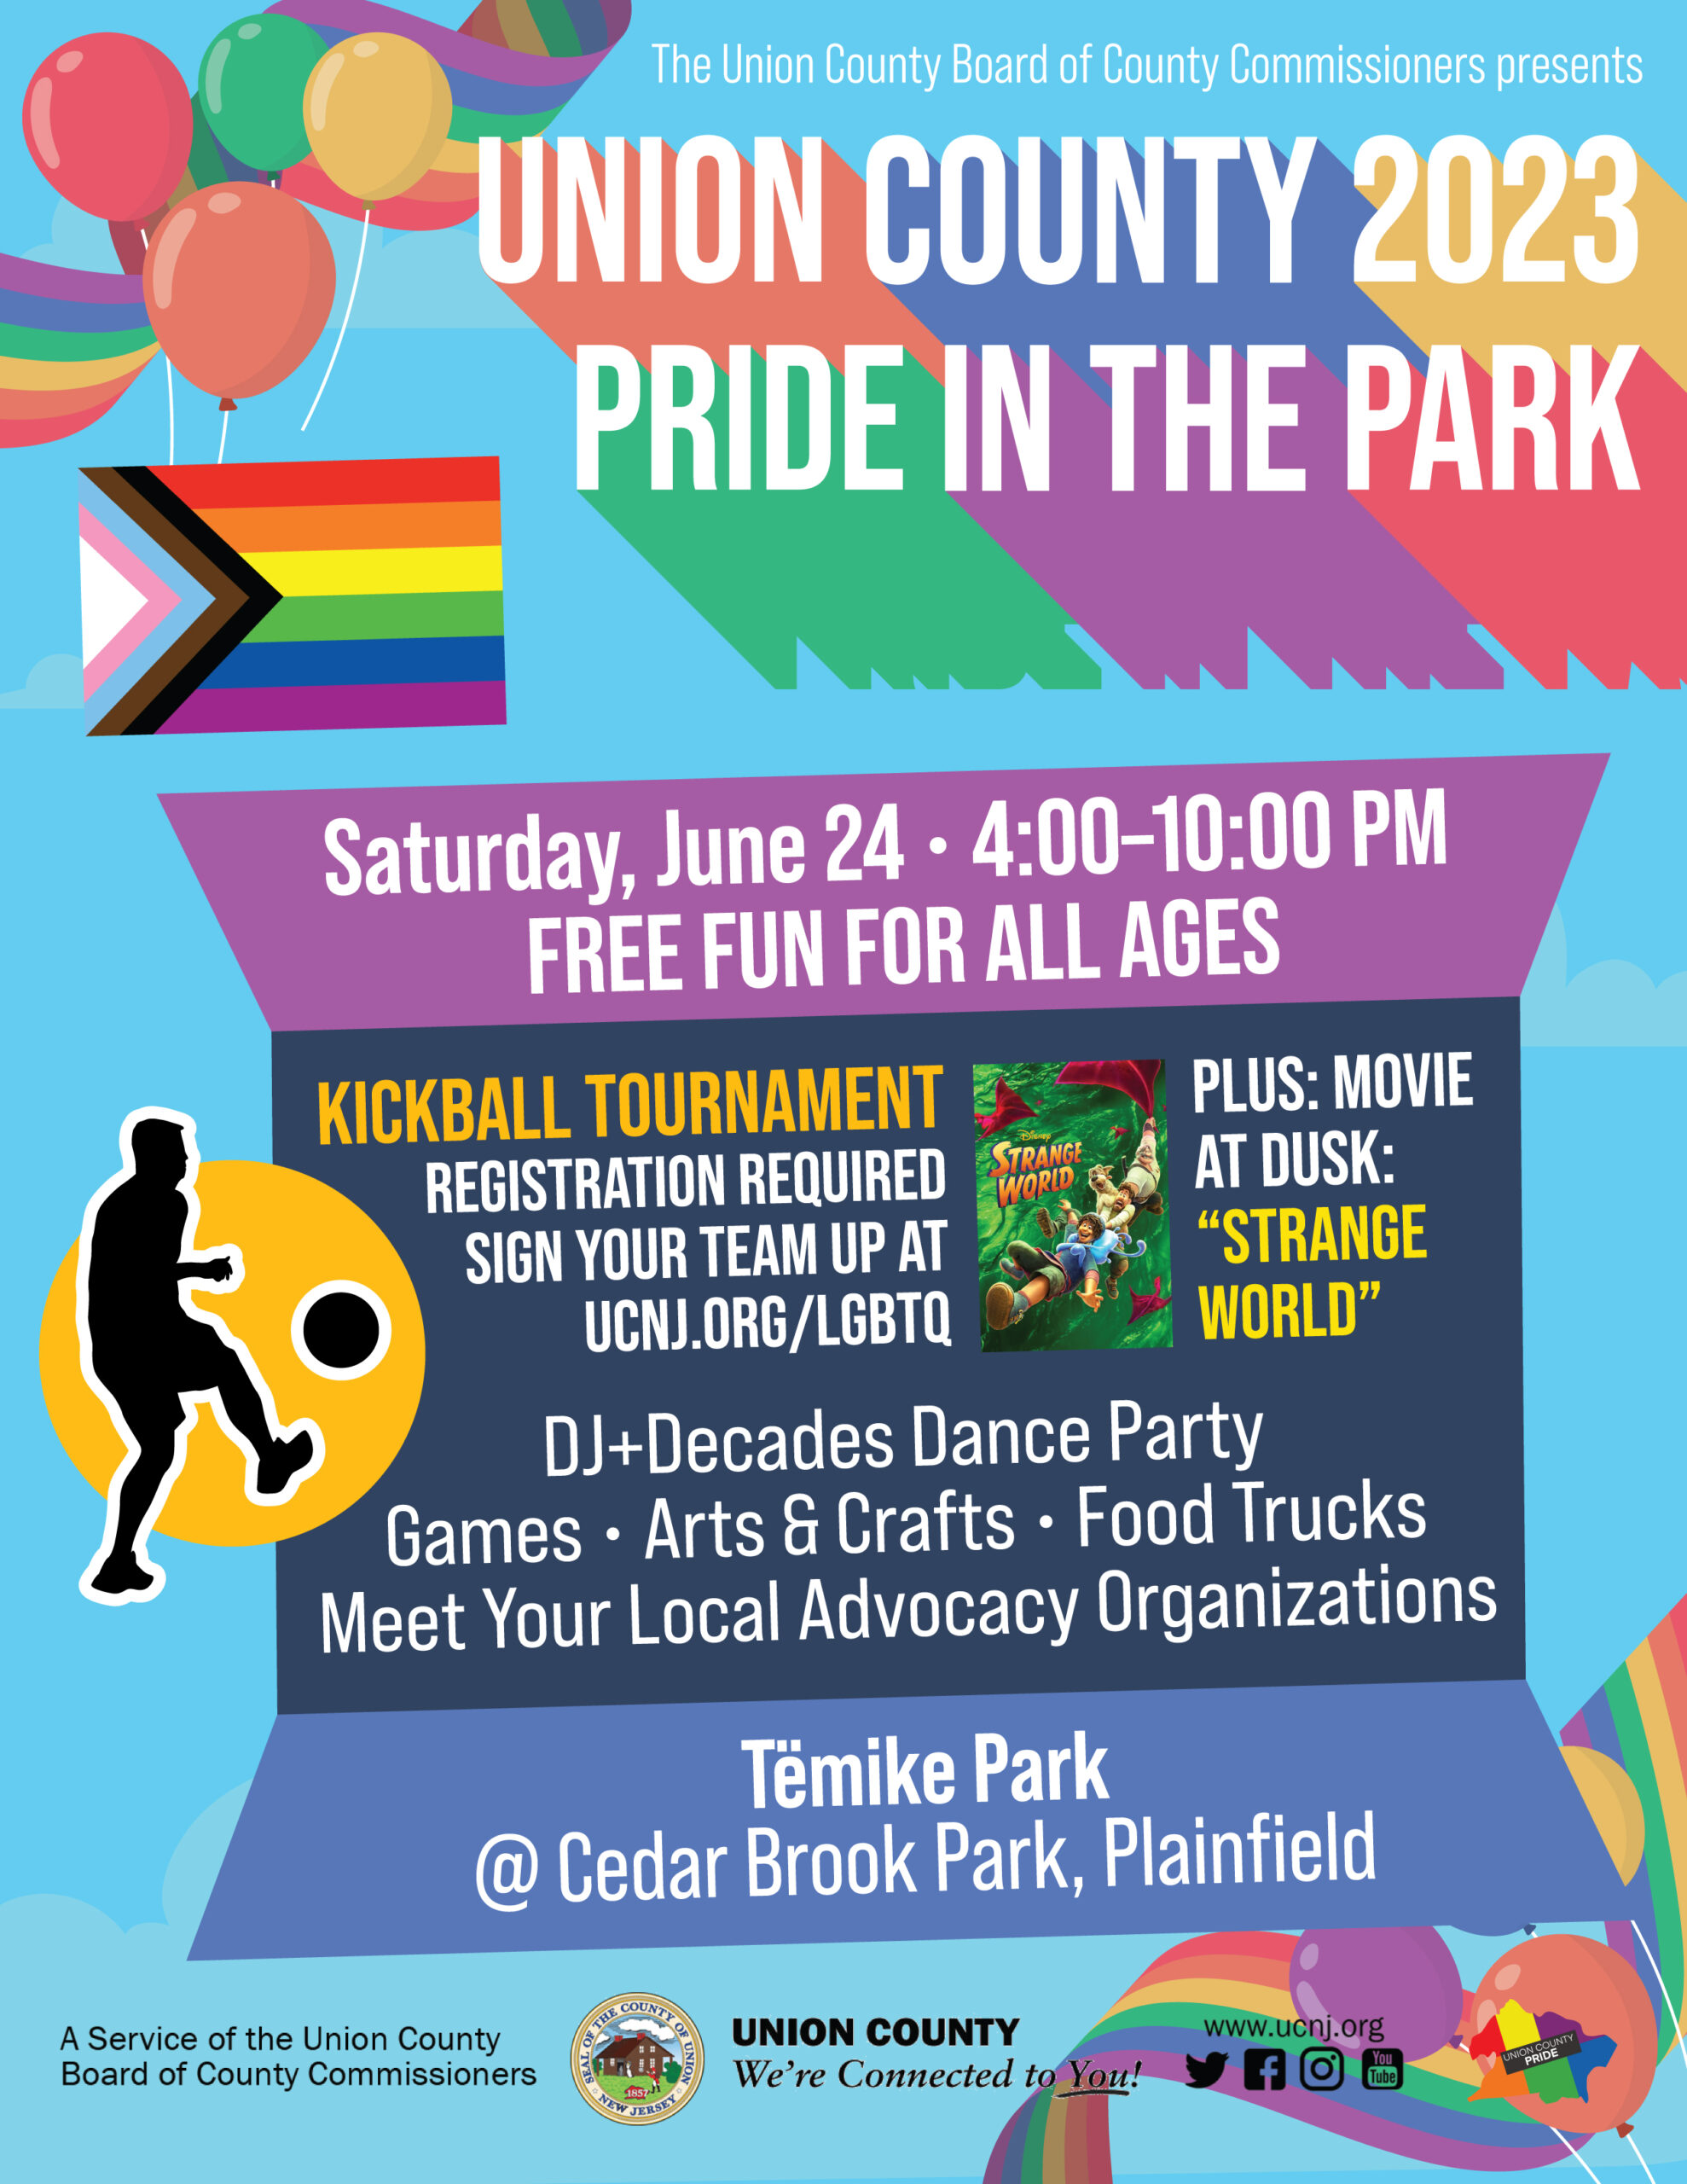 Union County 2023 Pride in the Park flyer